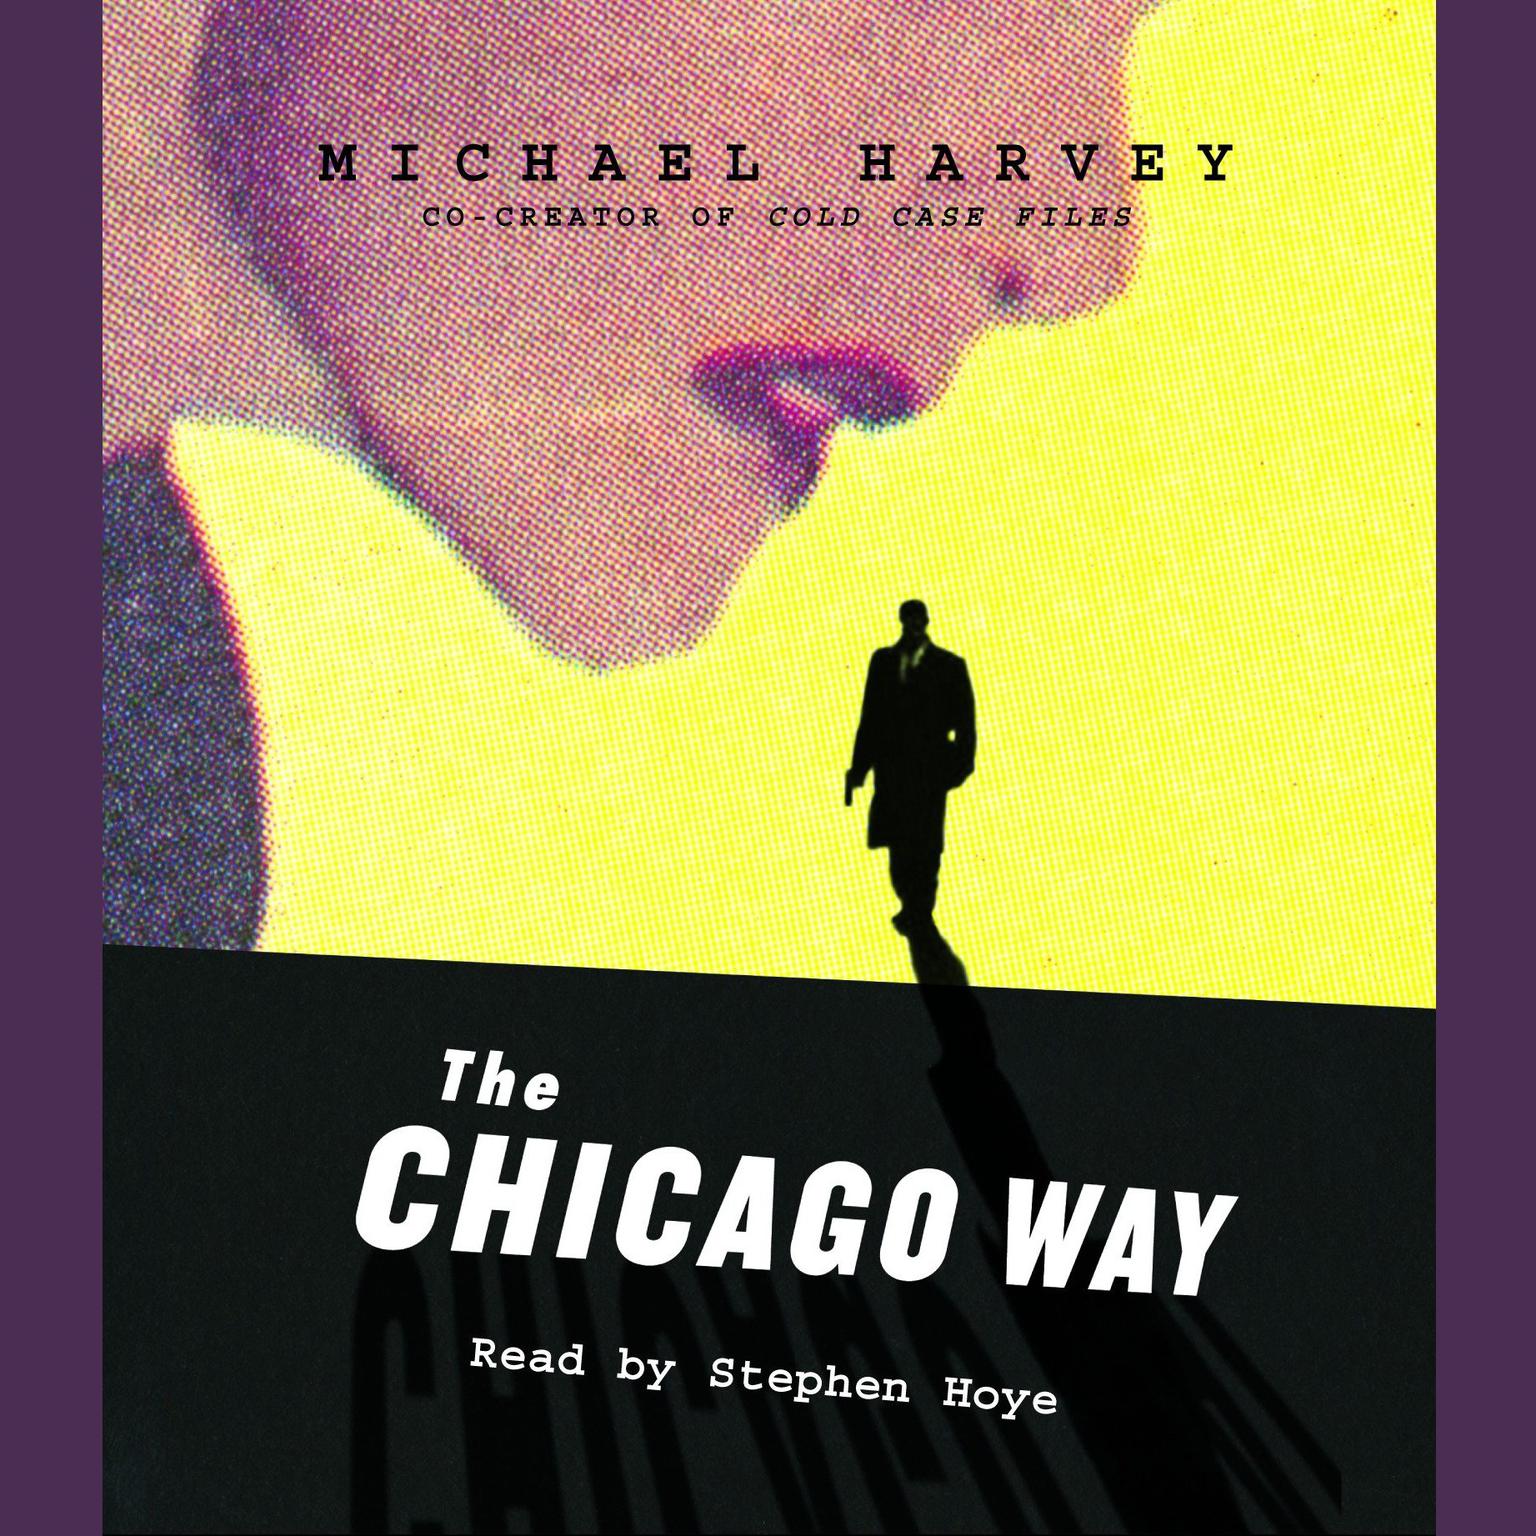 The Chicago Way (Abridged) Audiobook, by Michael Harvey